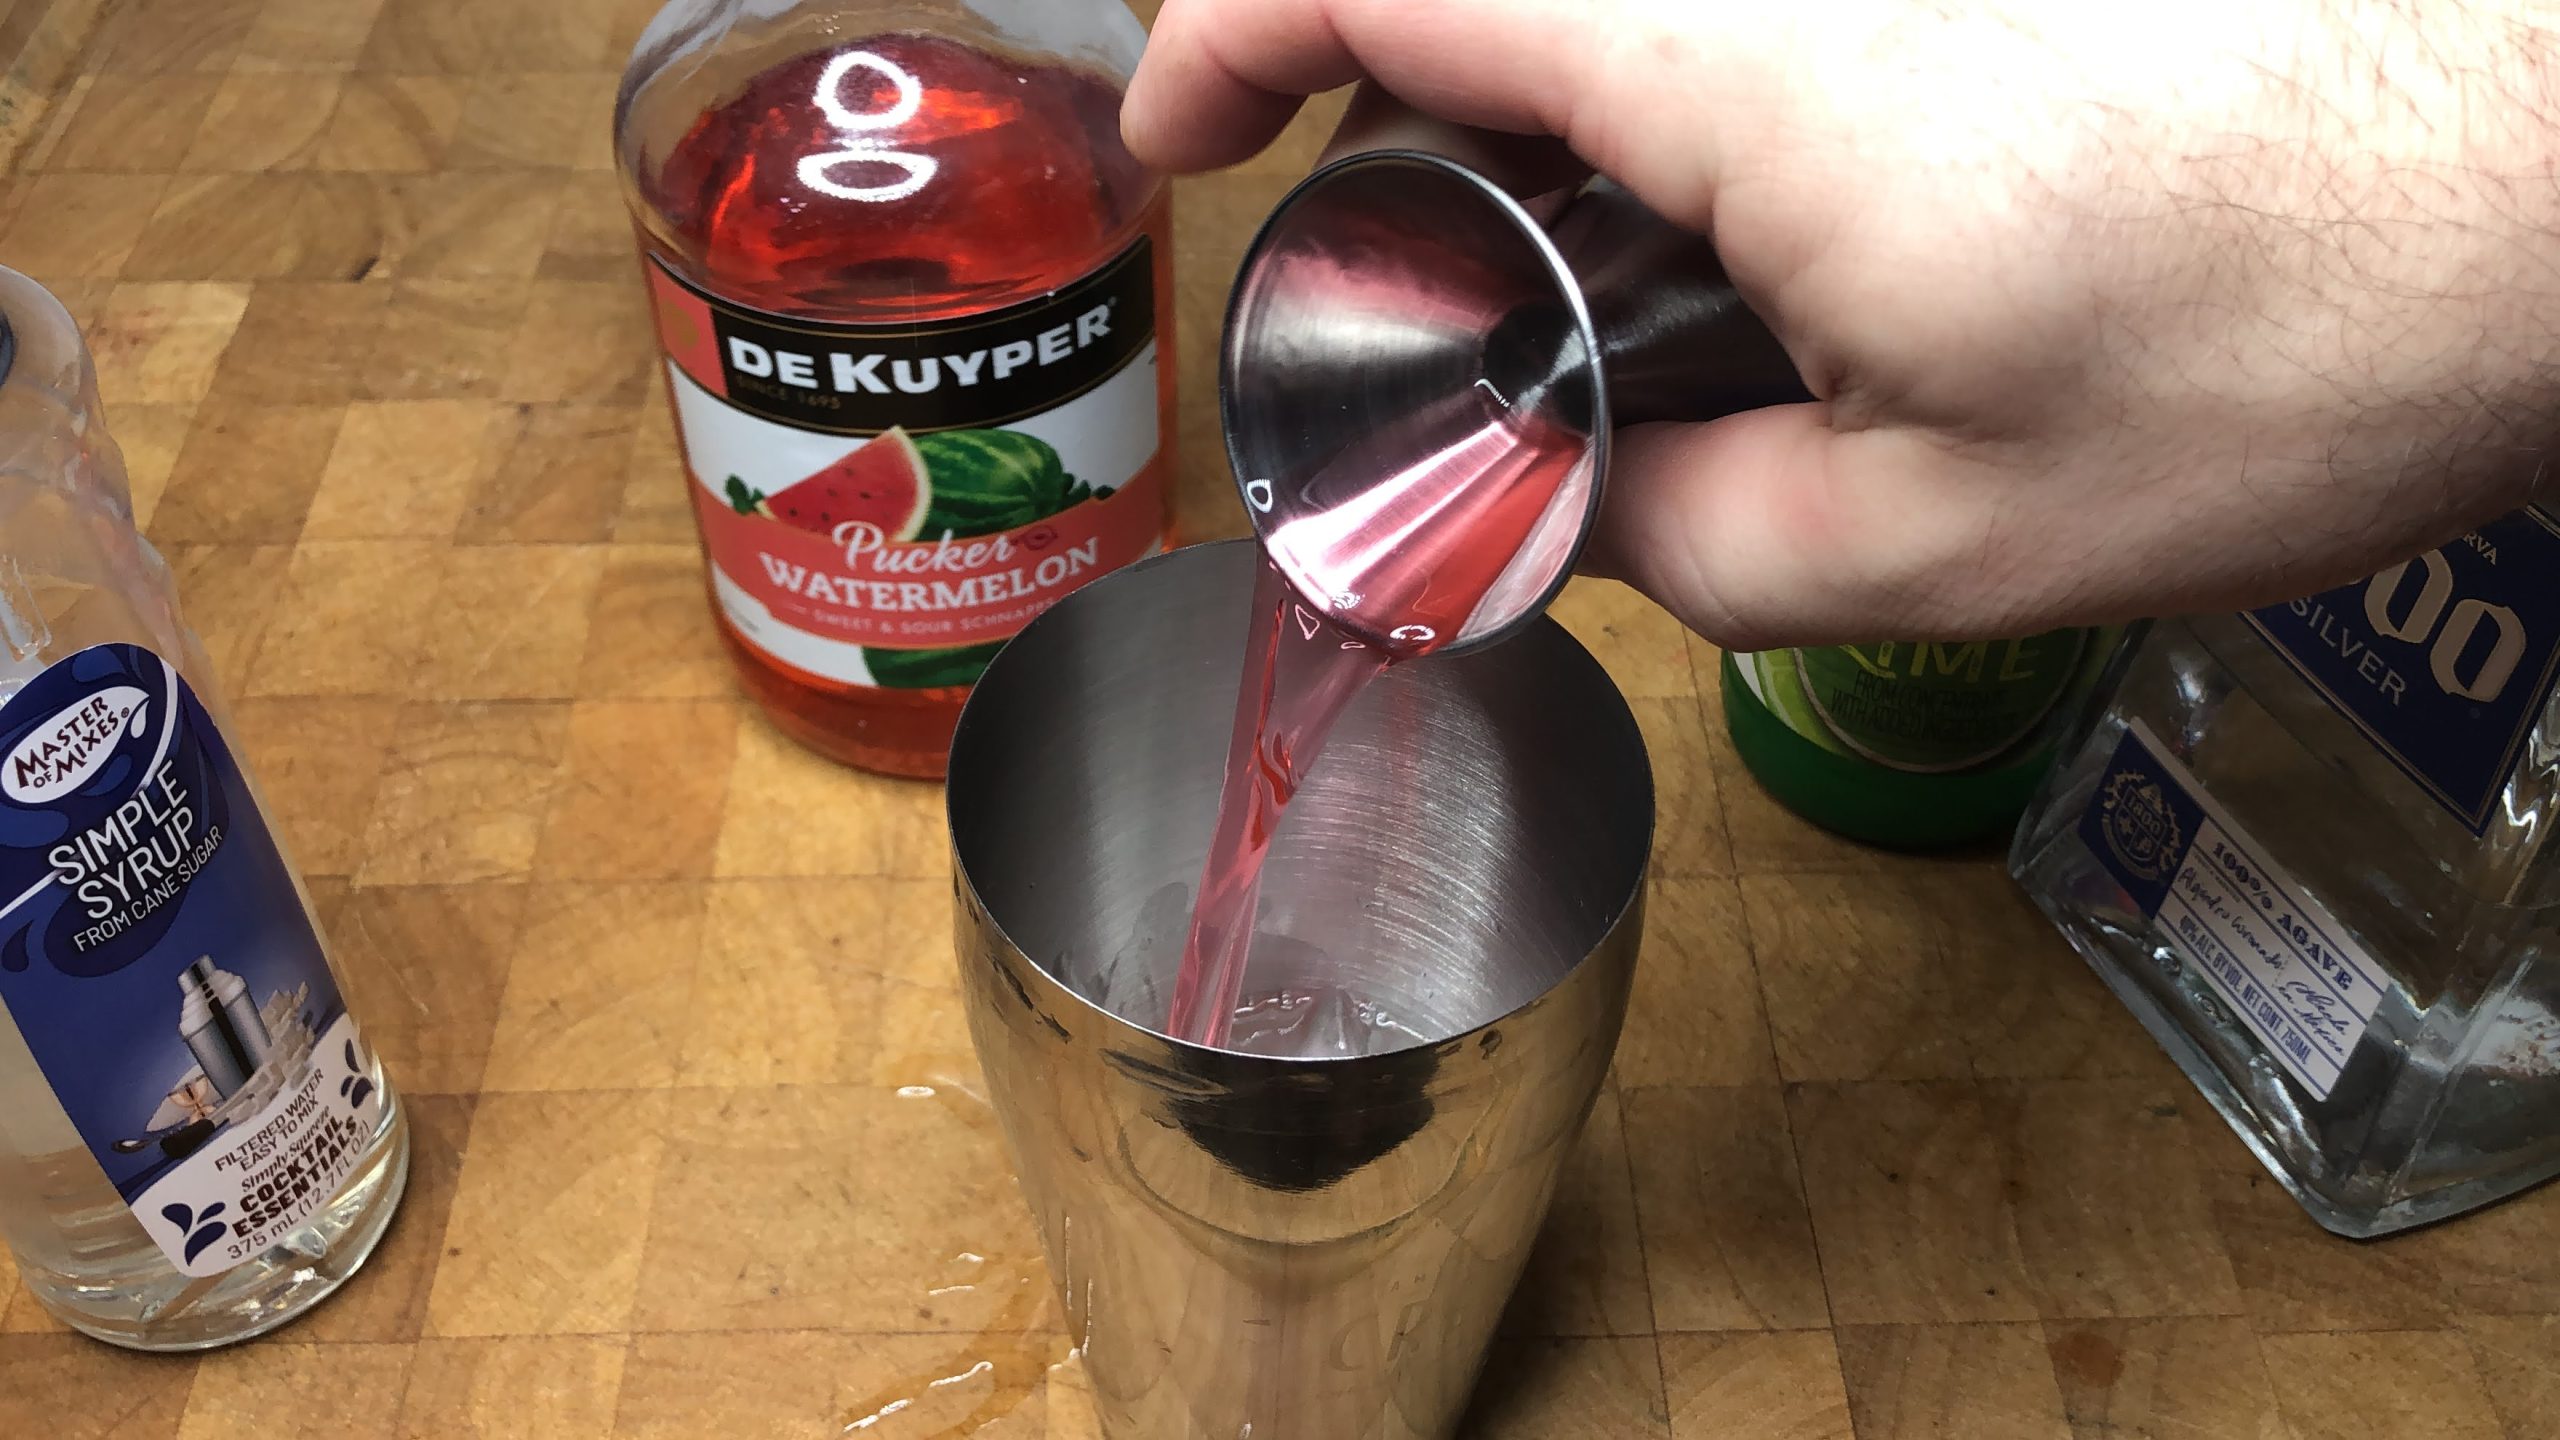 Pouring watermelon pucker from a jigger into a shaker.